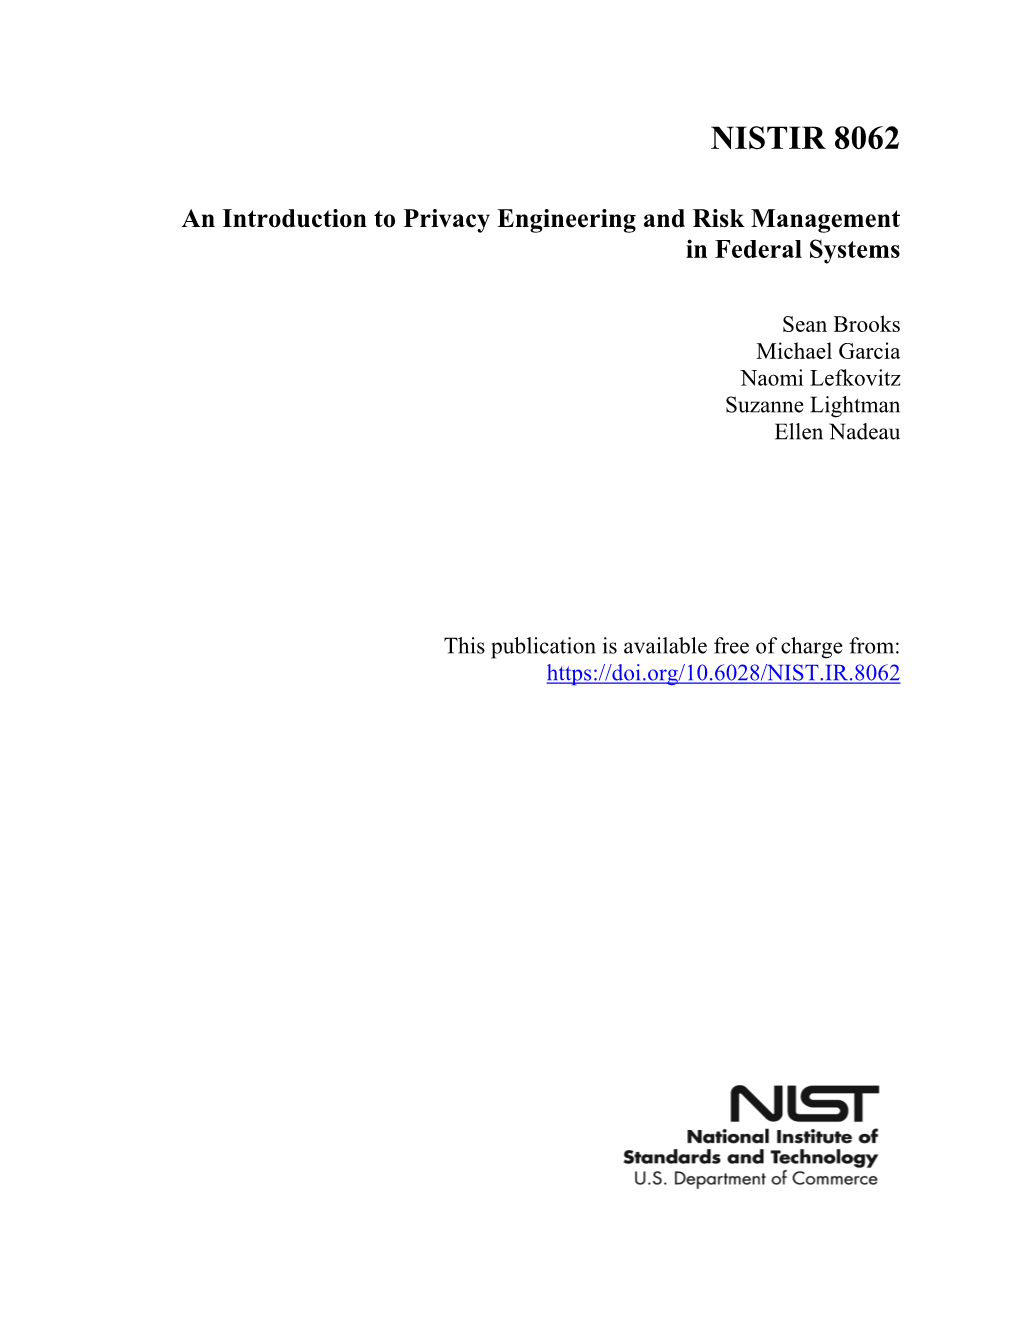 An Introduction to Privacy Engineering and Risk Management in Federal Systems